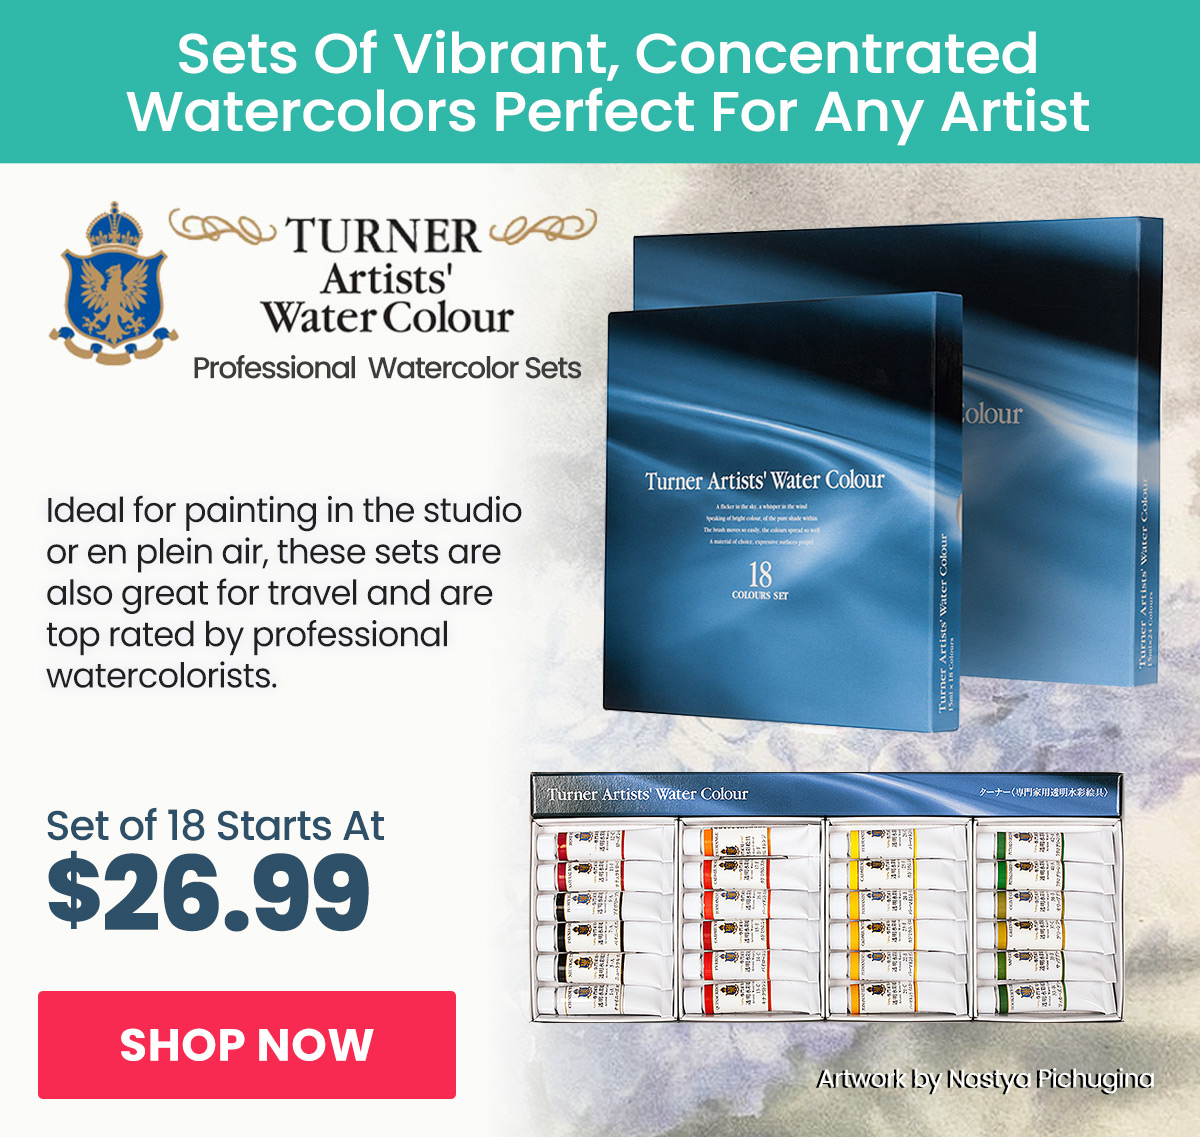 Turner Professional Artists' Watercolor Sets